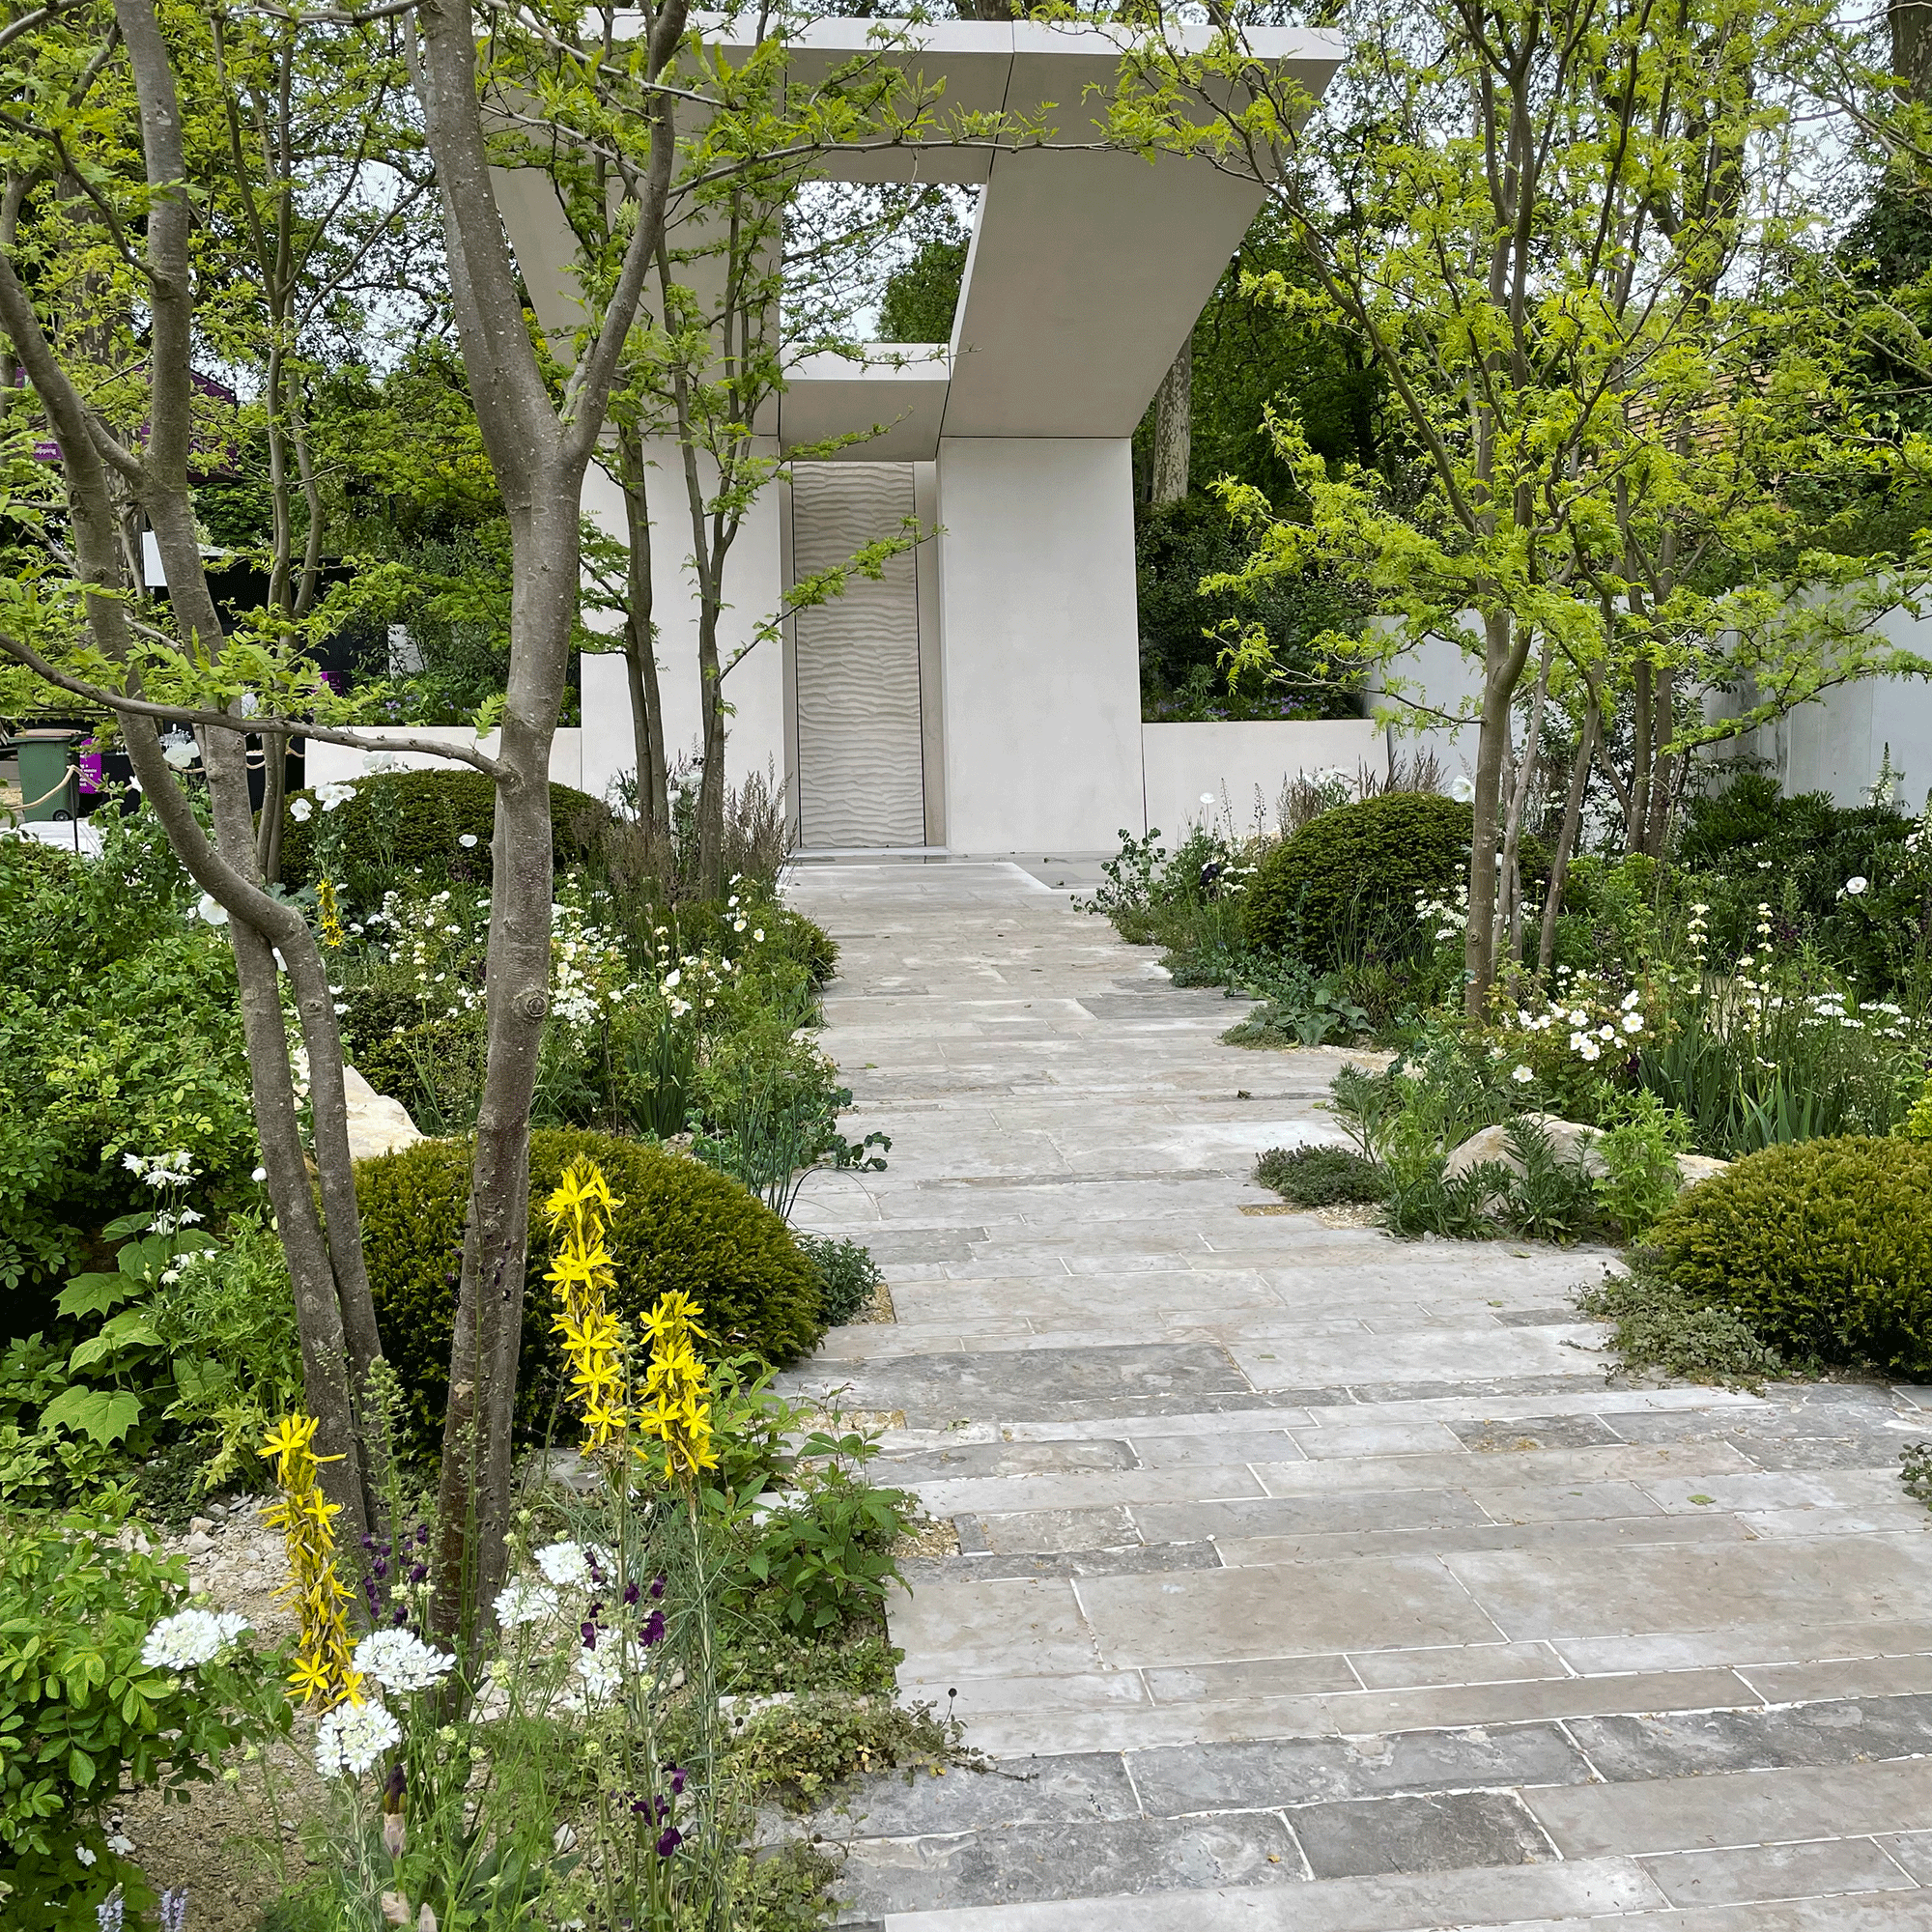 Grey stone path and concrete structure